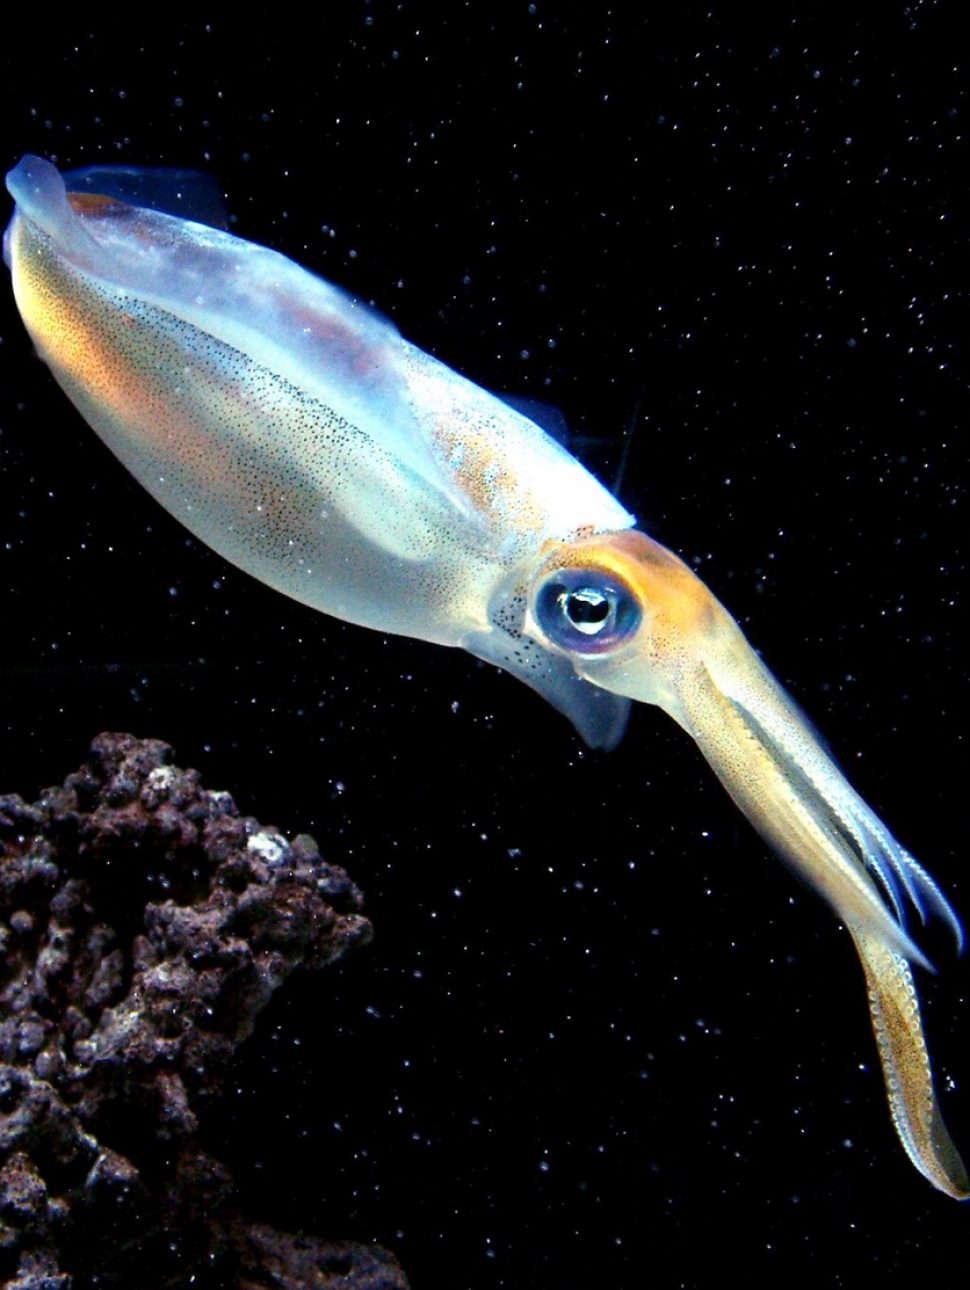 This is an image of a colourful squid swimming in the ocean